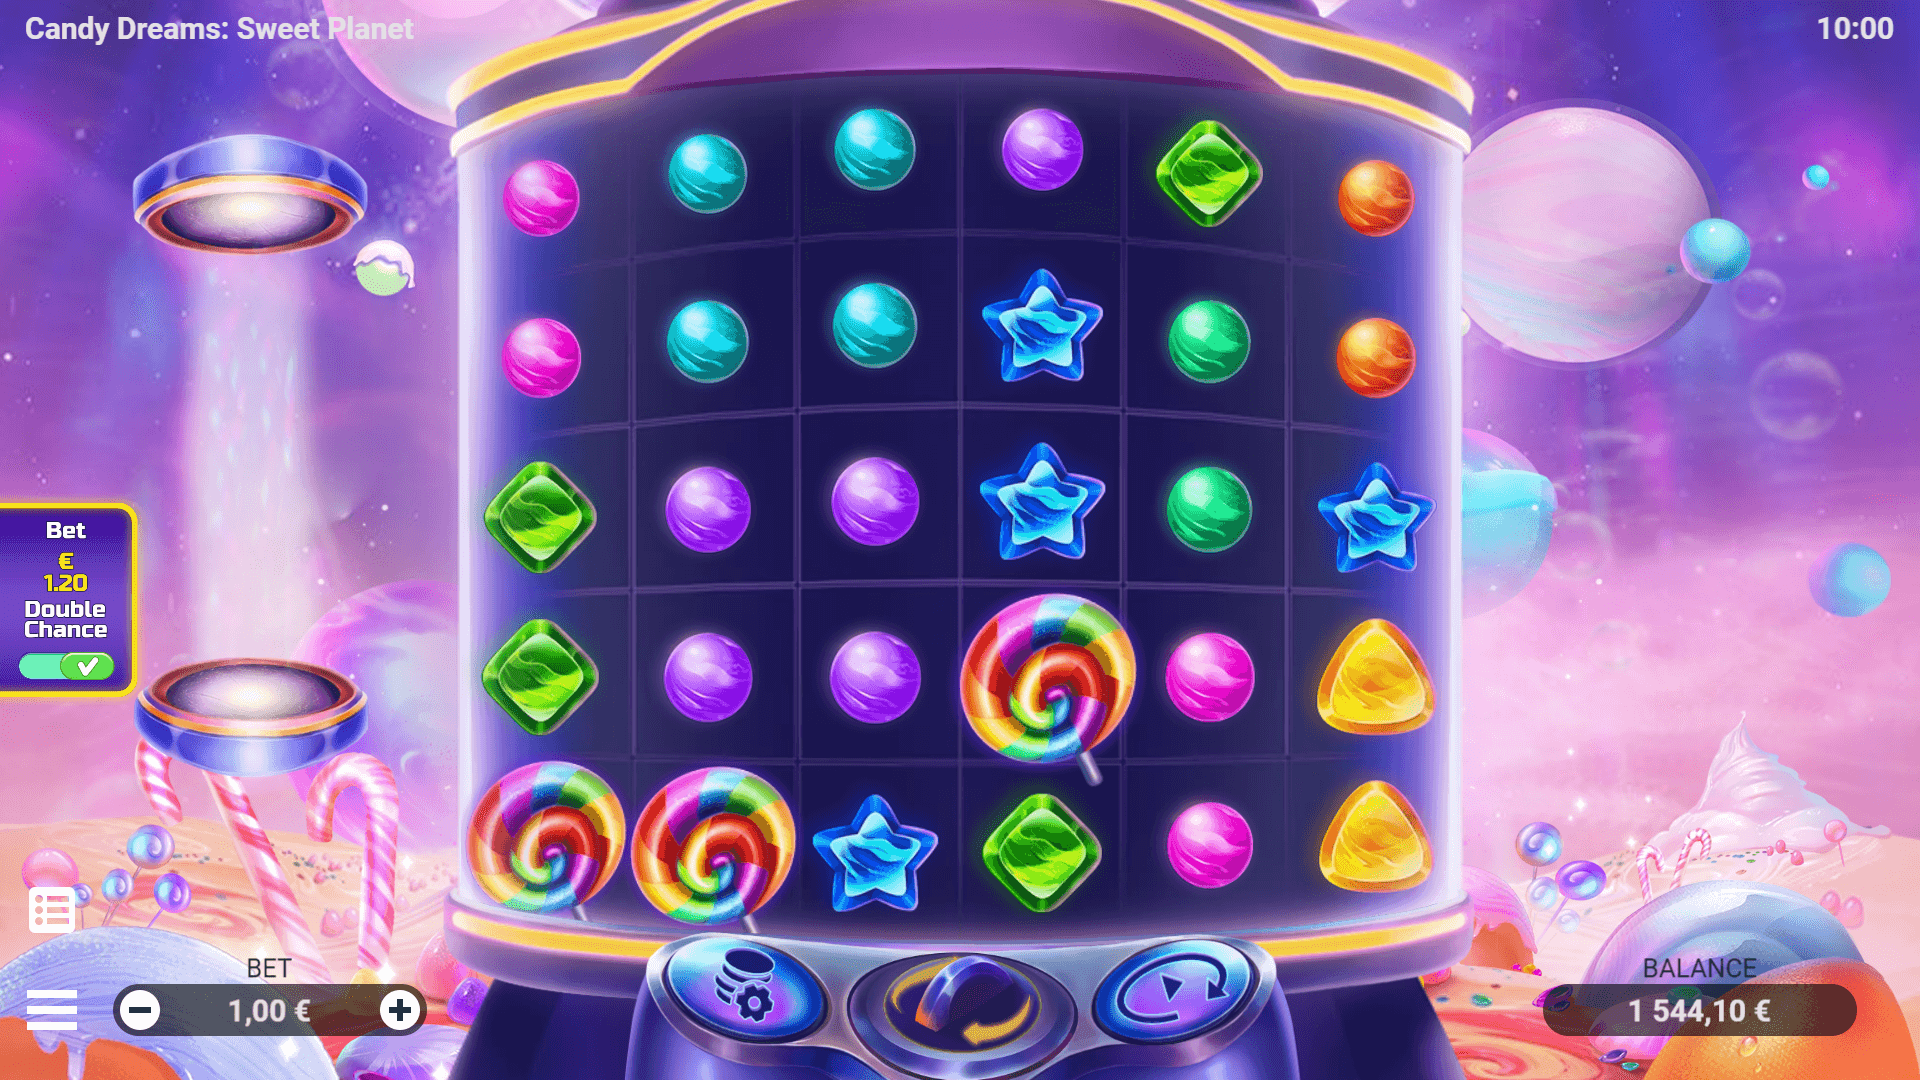 Candy Dreams Sweet Planet Evoplay PG Slot1234